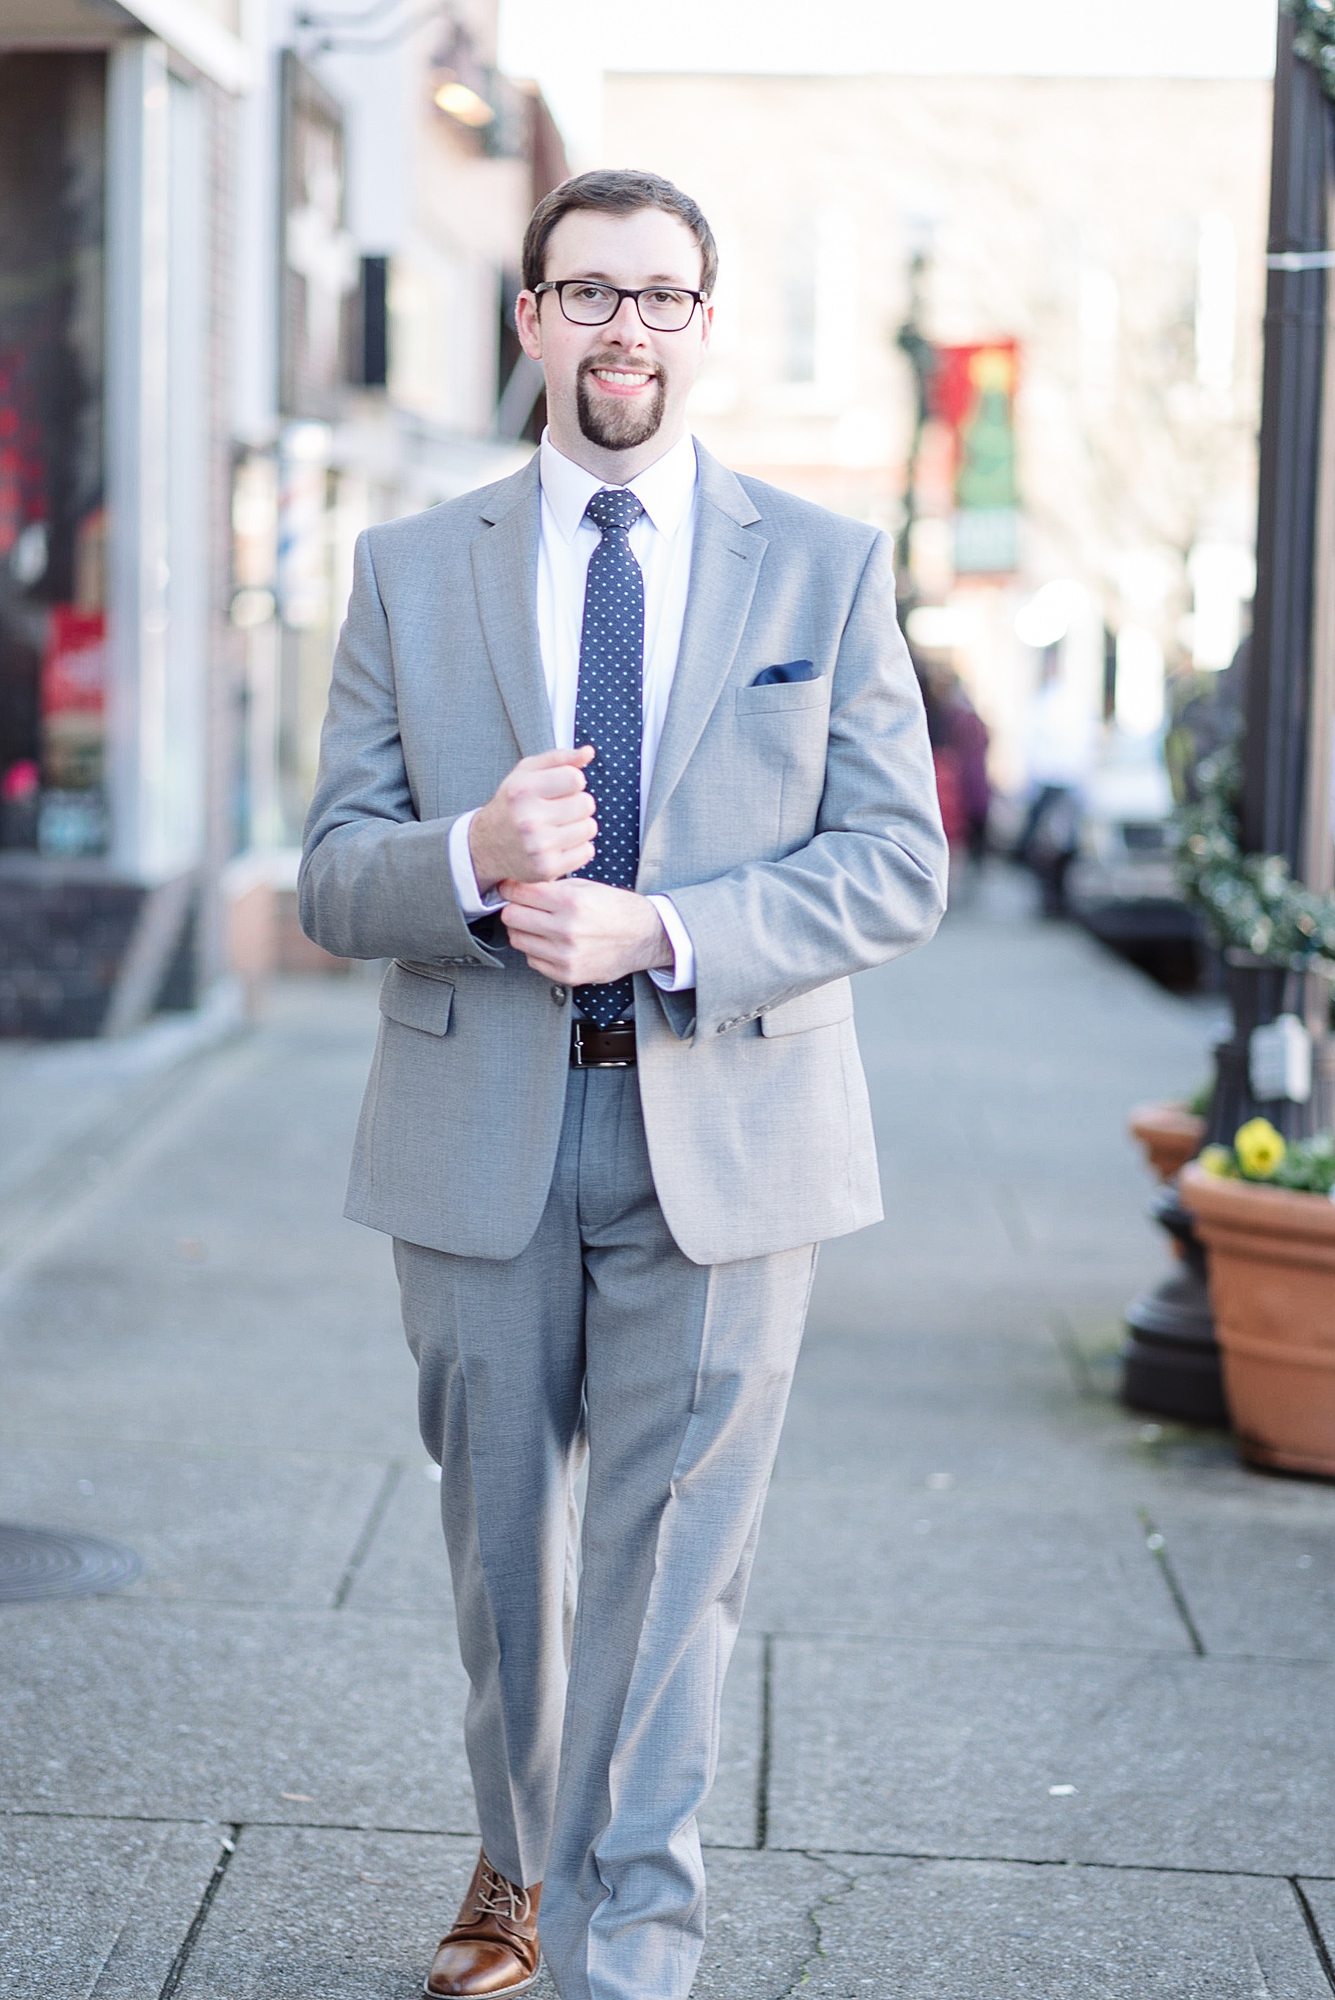 A groom is smiling at the camera before his winter wedding in downtown murfreesboro by Dolly DeLong Photography